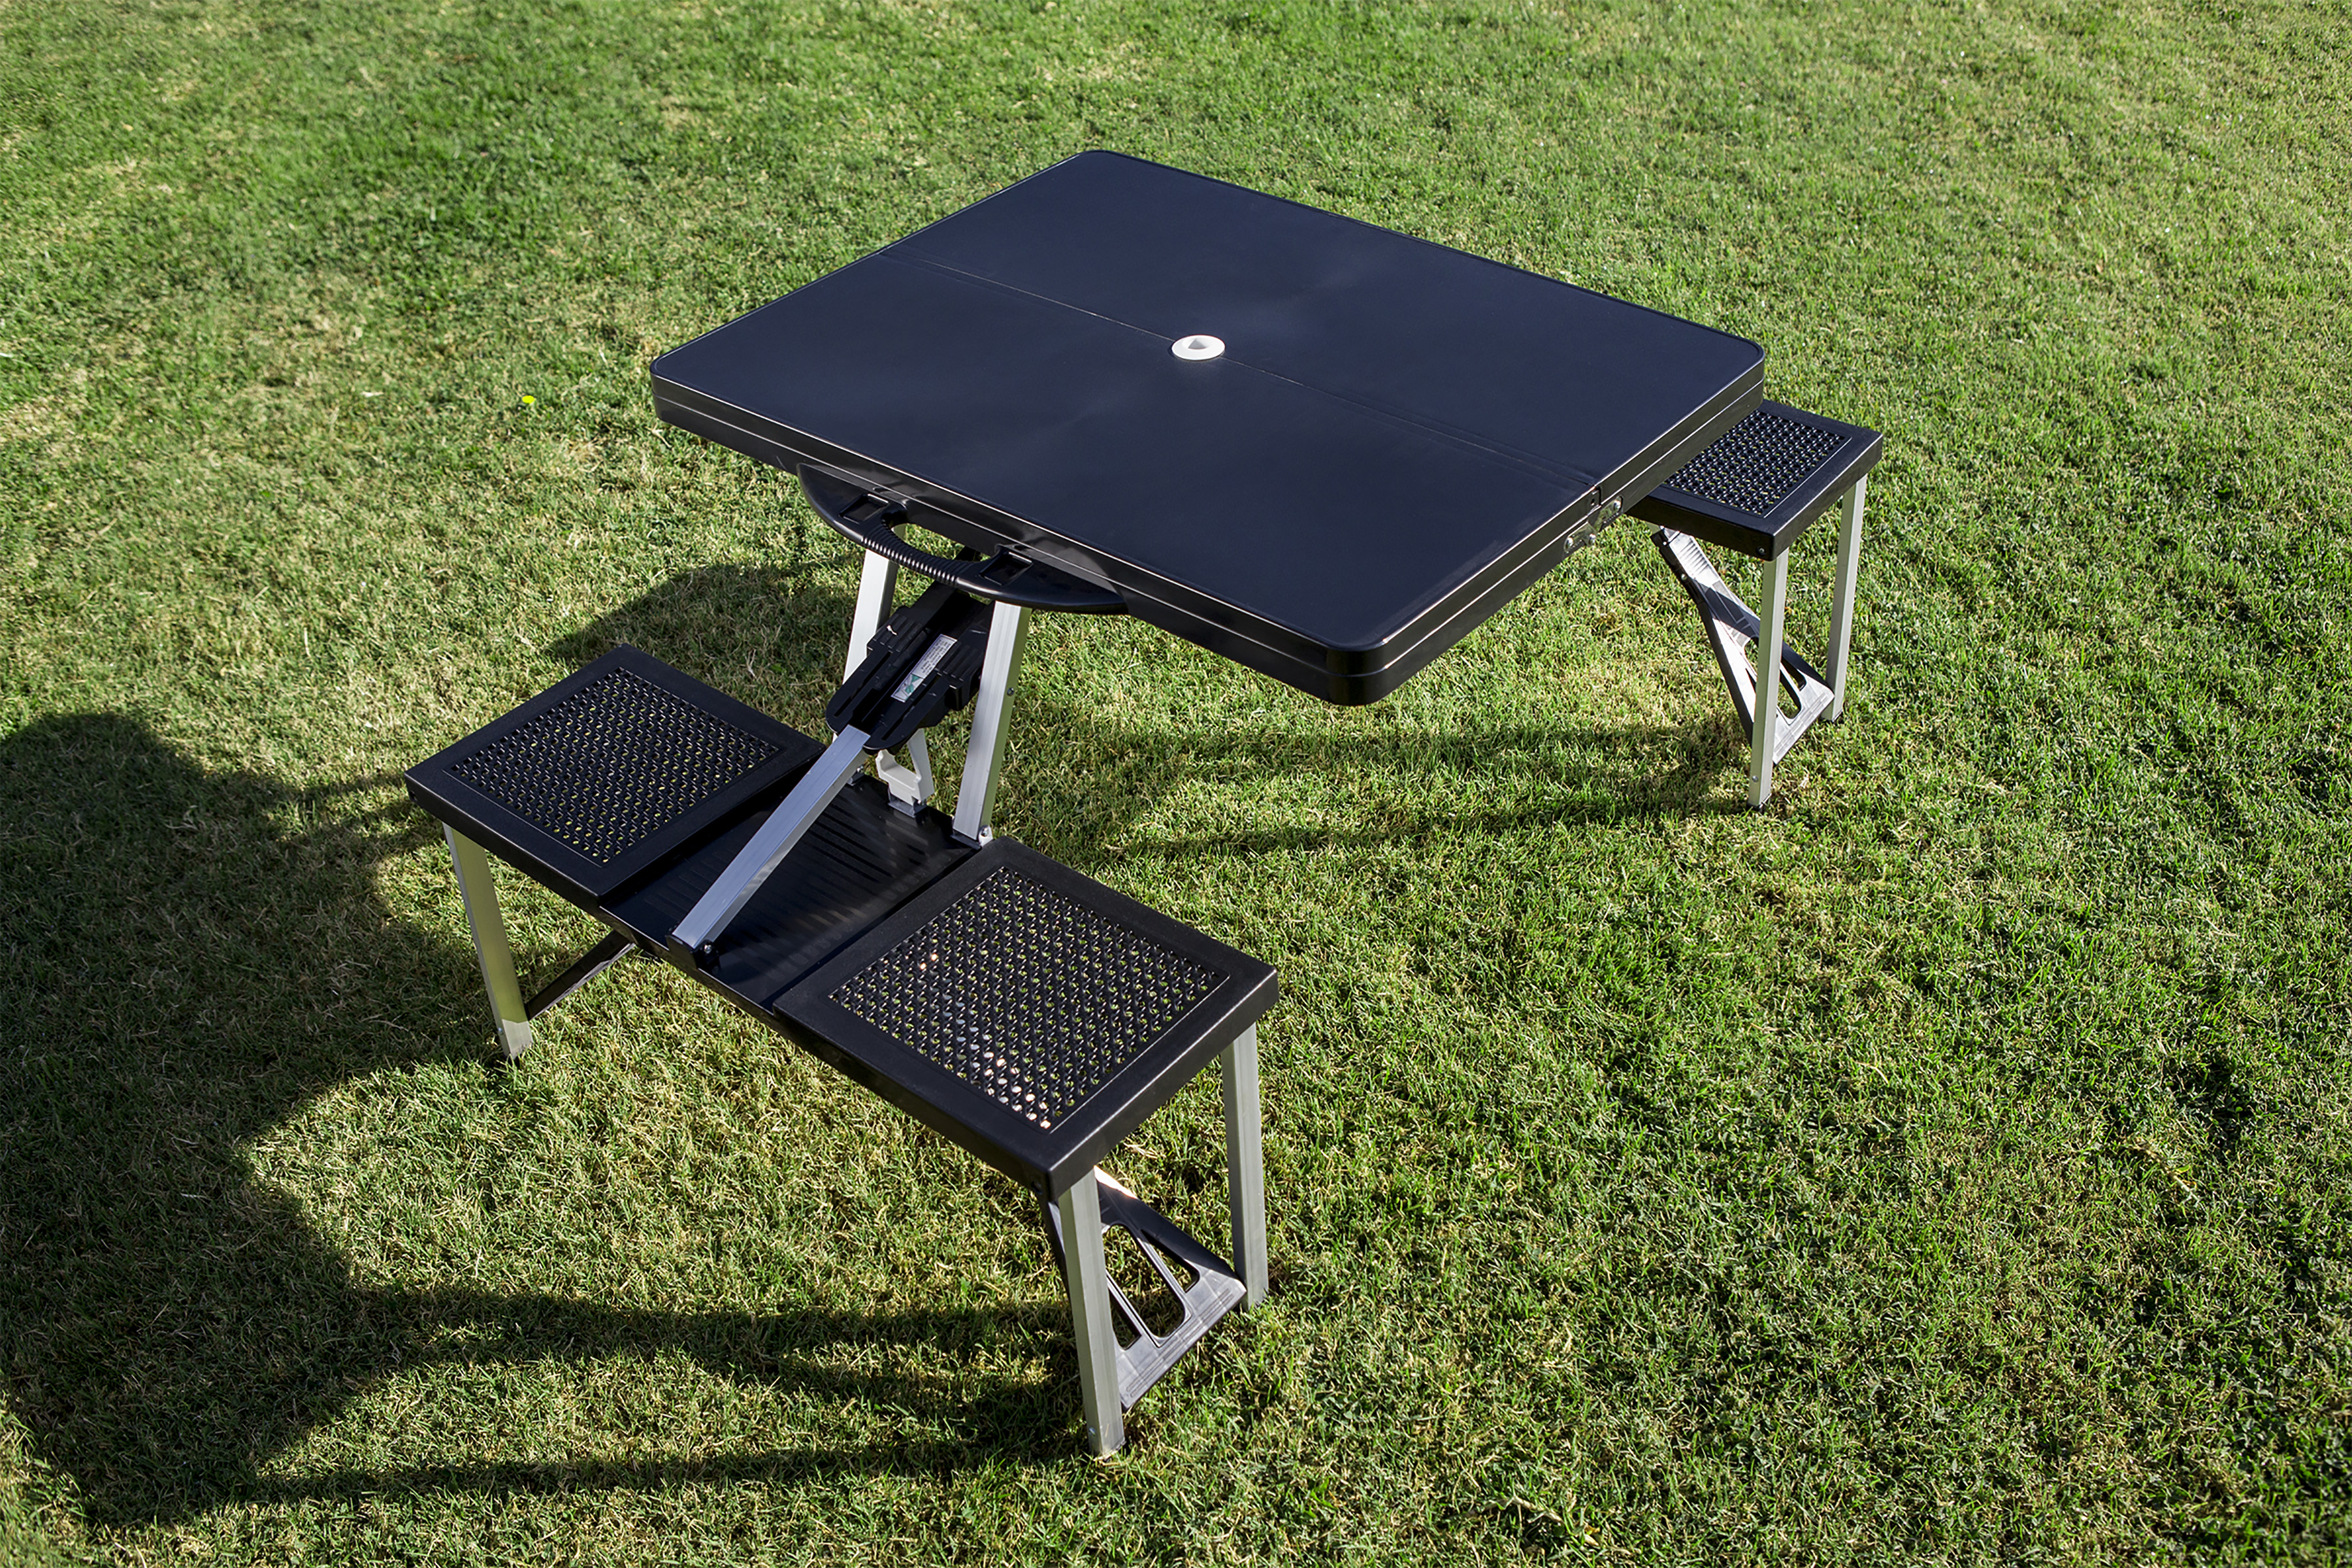 Football Field - Cincinnati Bengals - Picnic Table Portable Folding Table with Seats